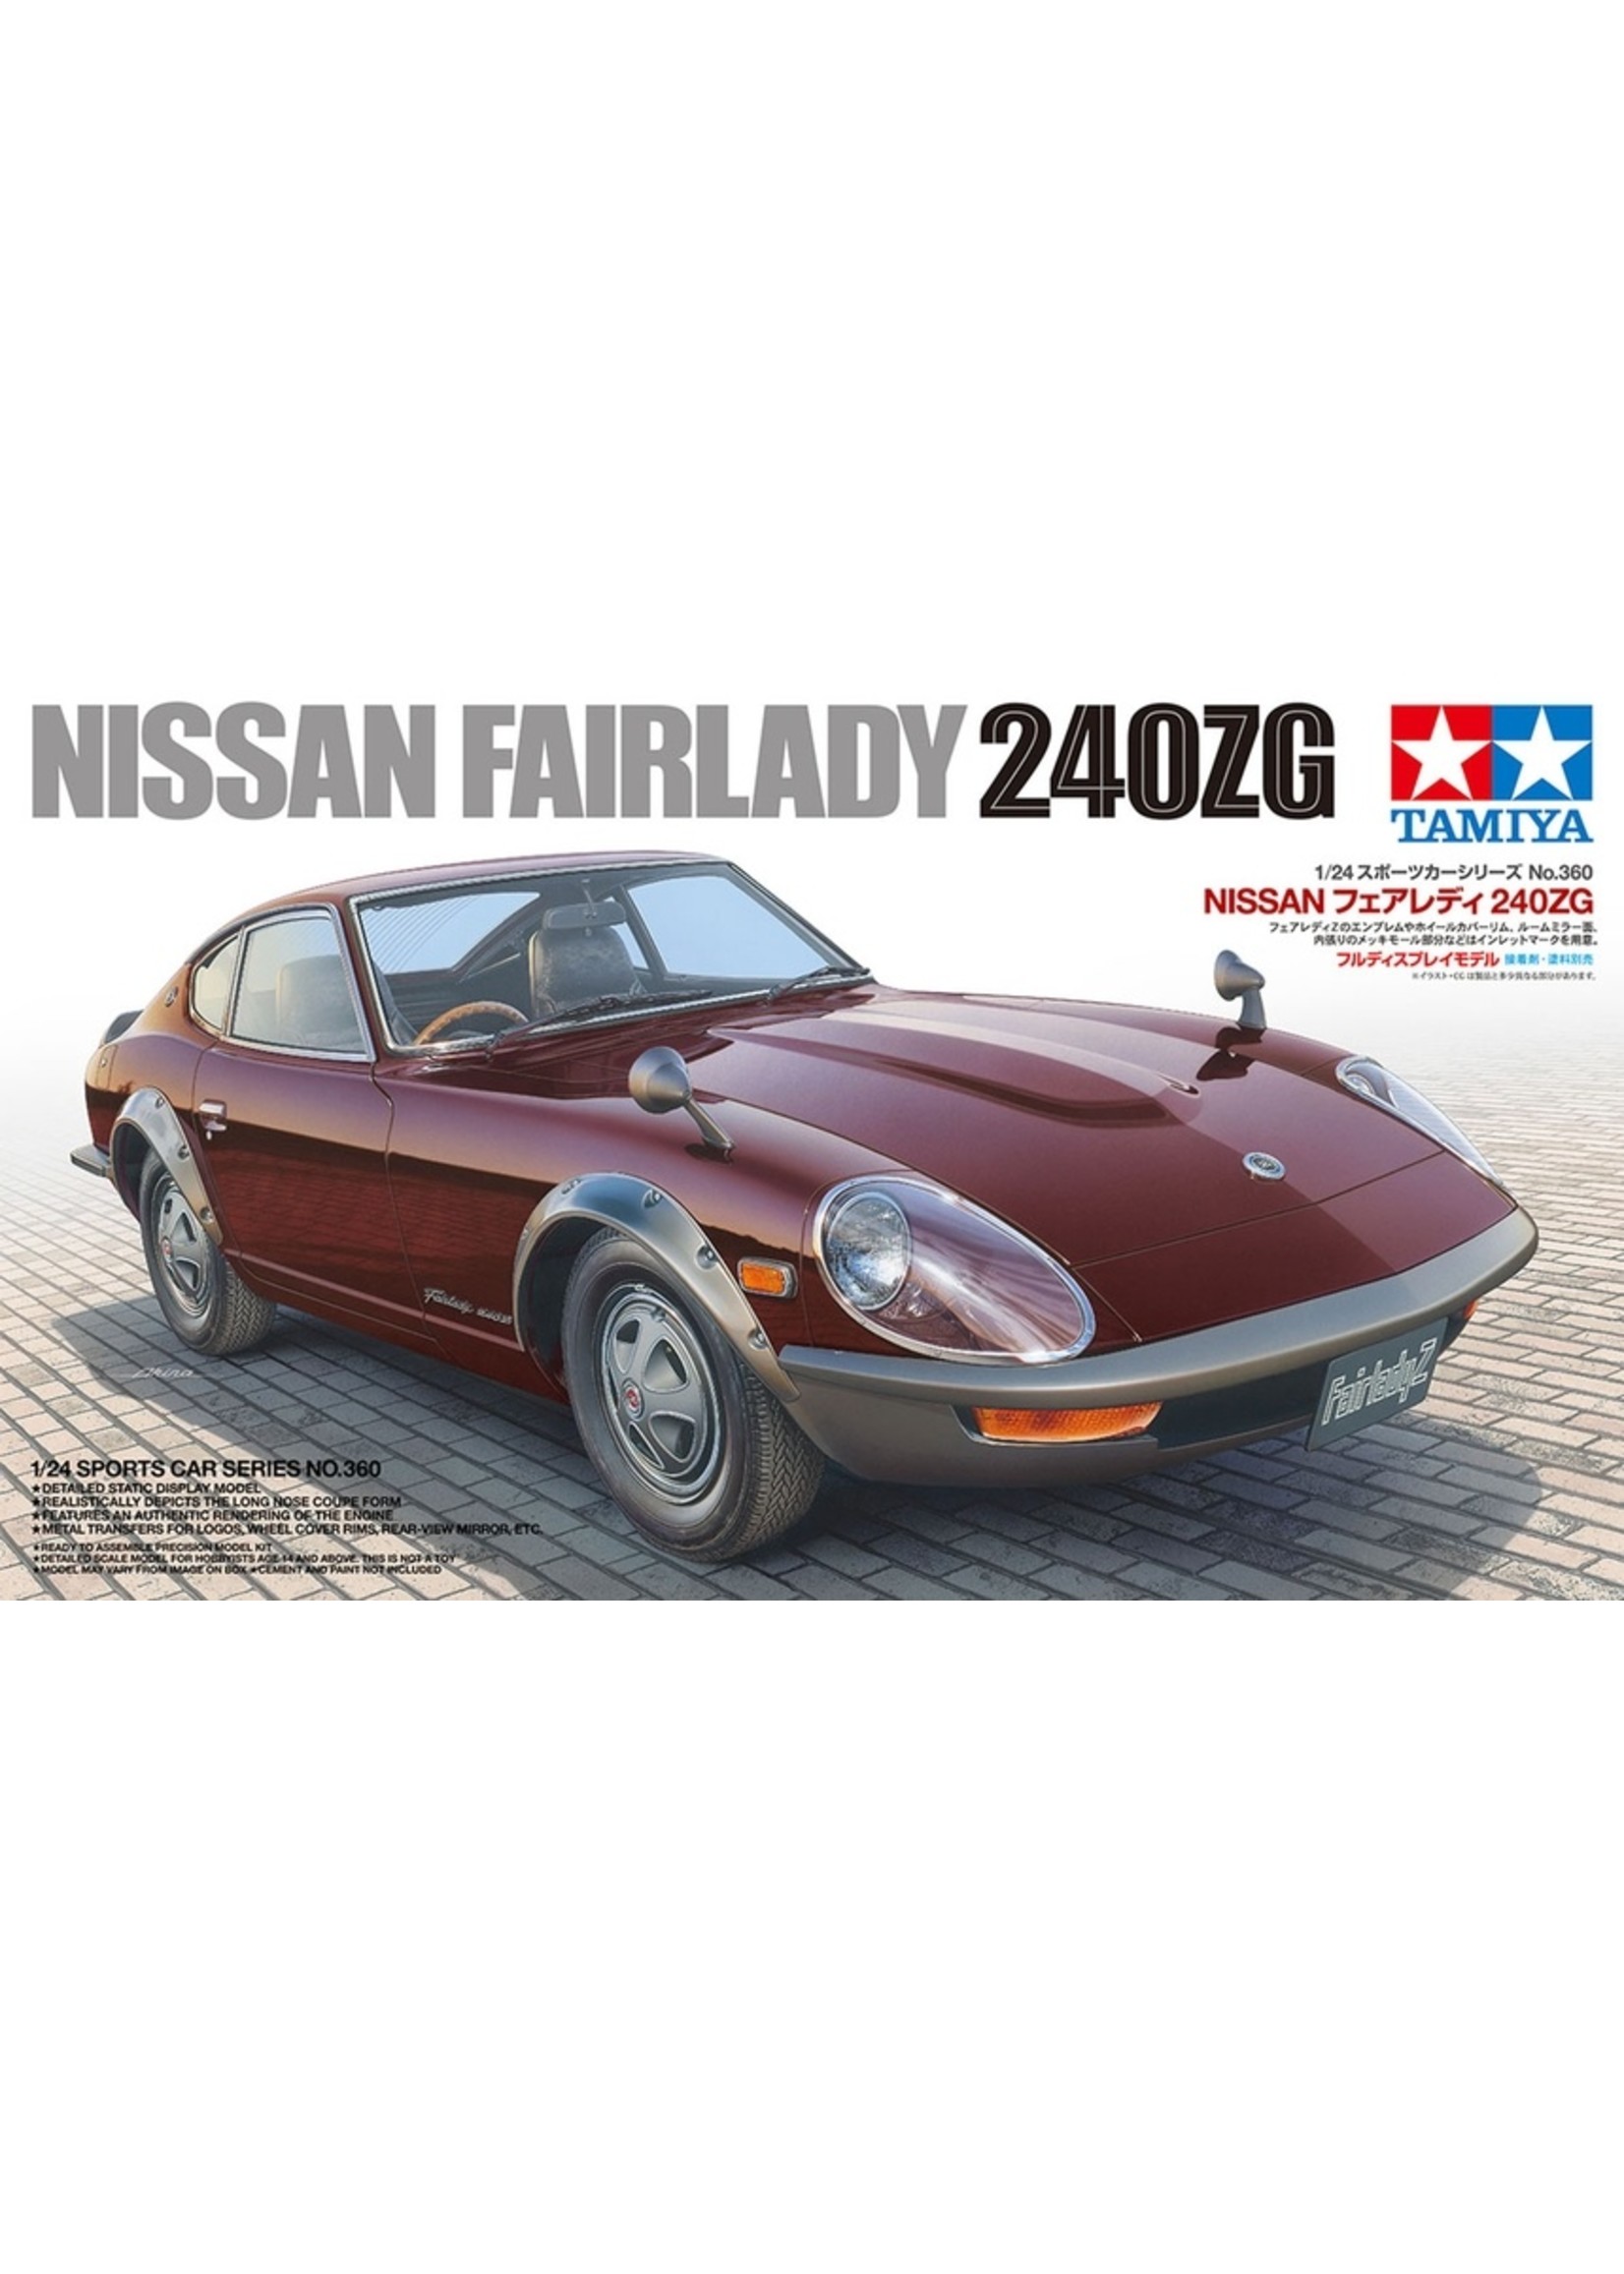 1/43 Museum Collection FAIRLADY 240ZG - ミニカー